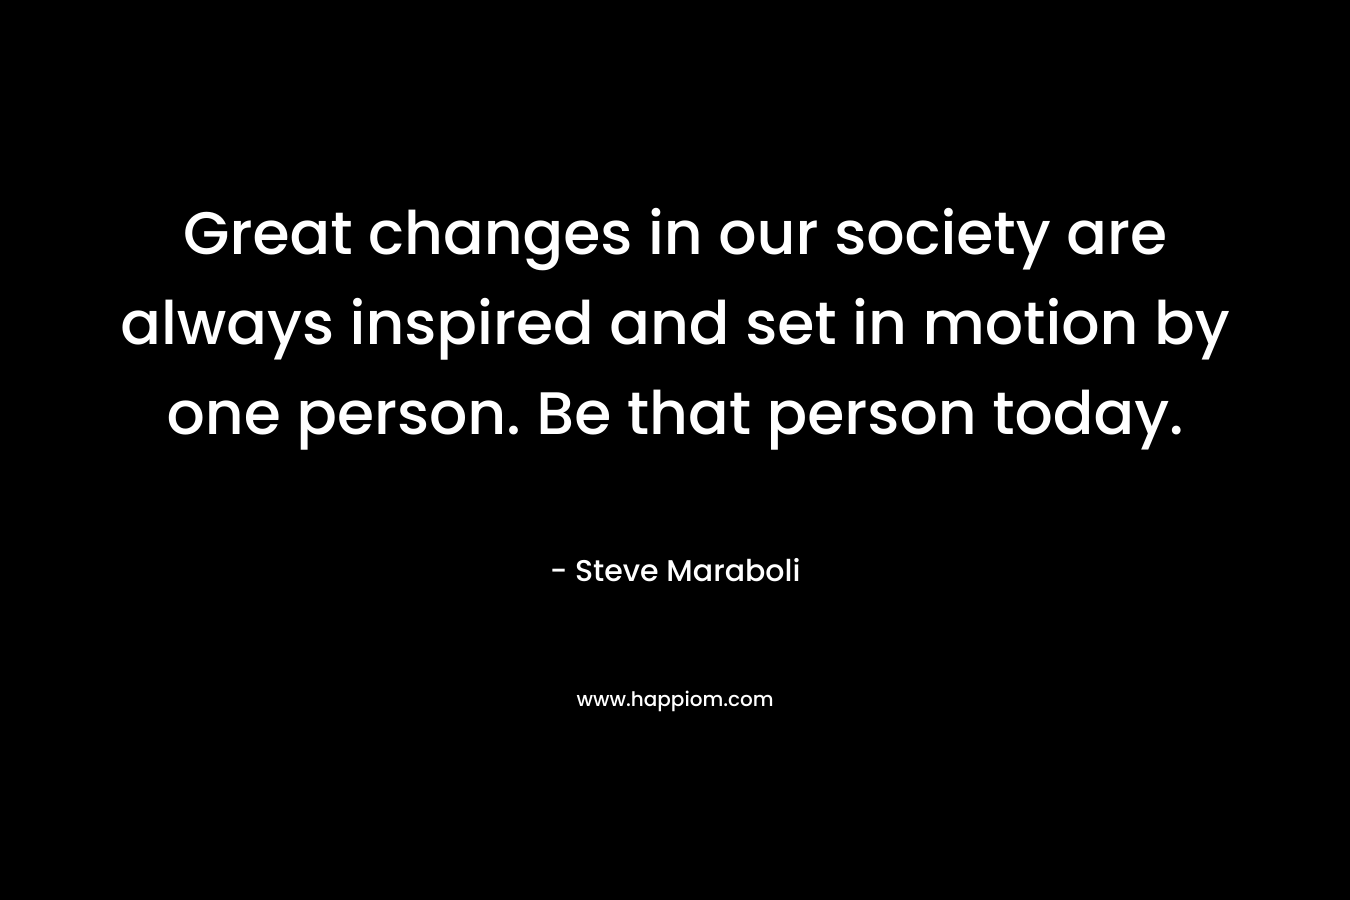 Great changes in our society are always inspired and set in motion by one person. Be that person today.